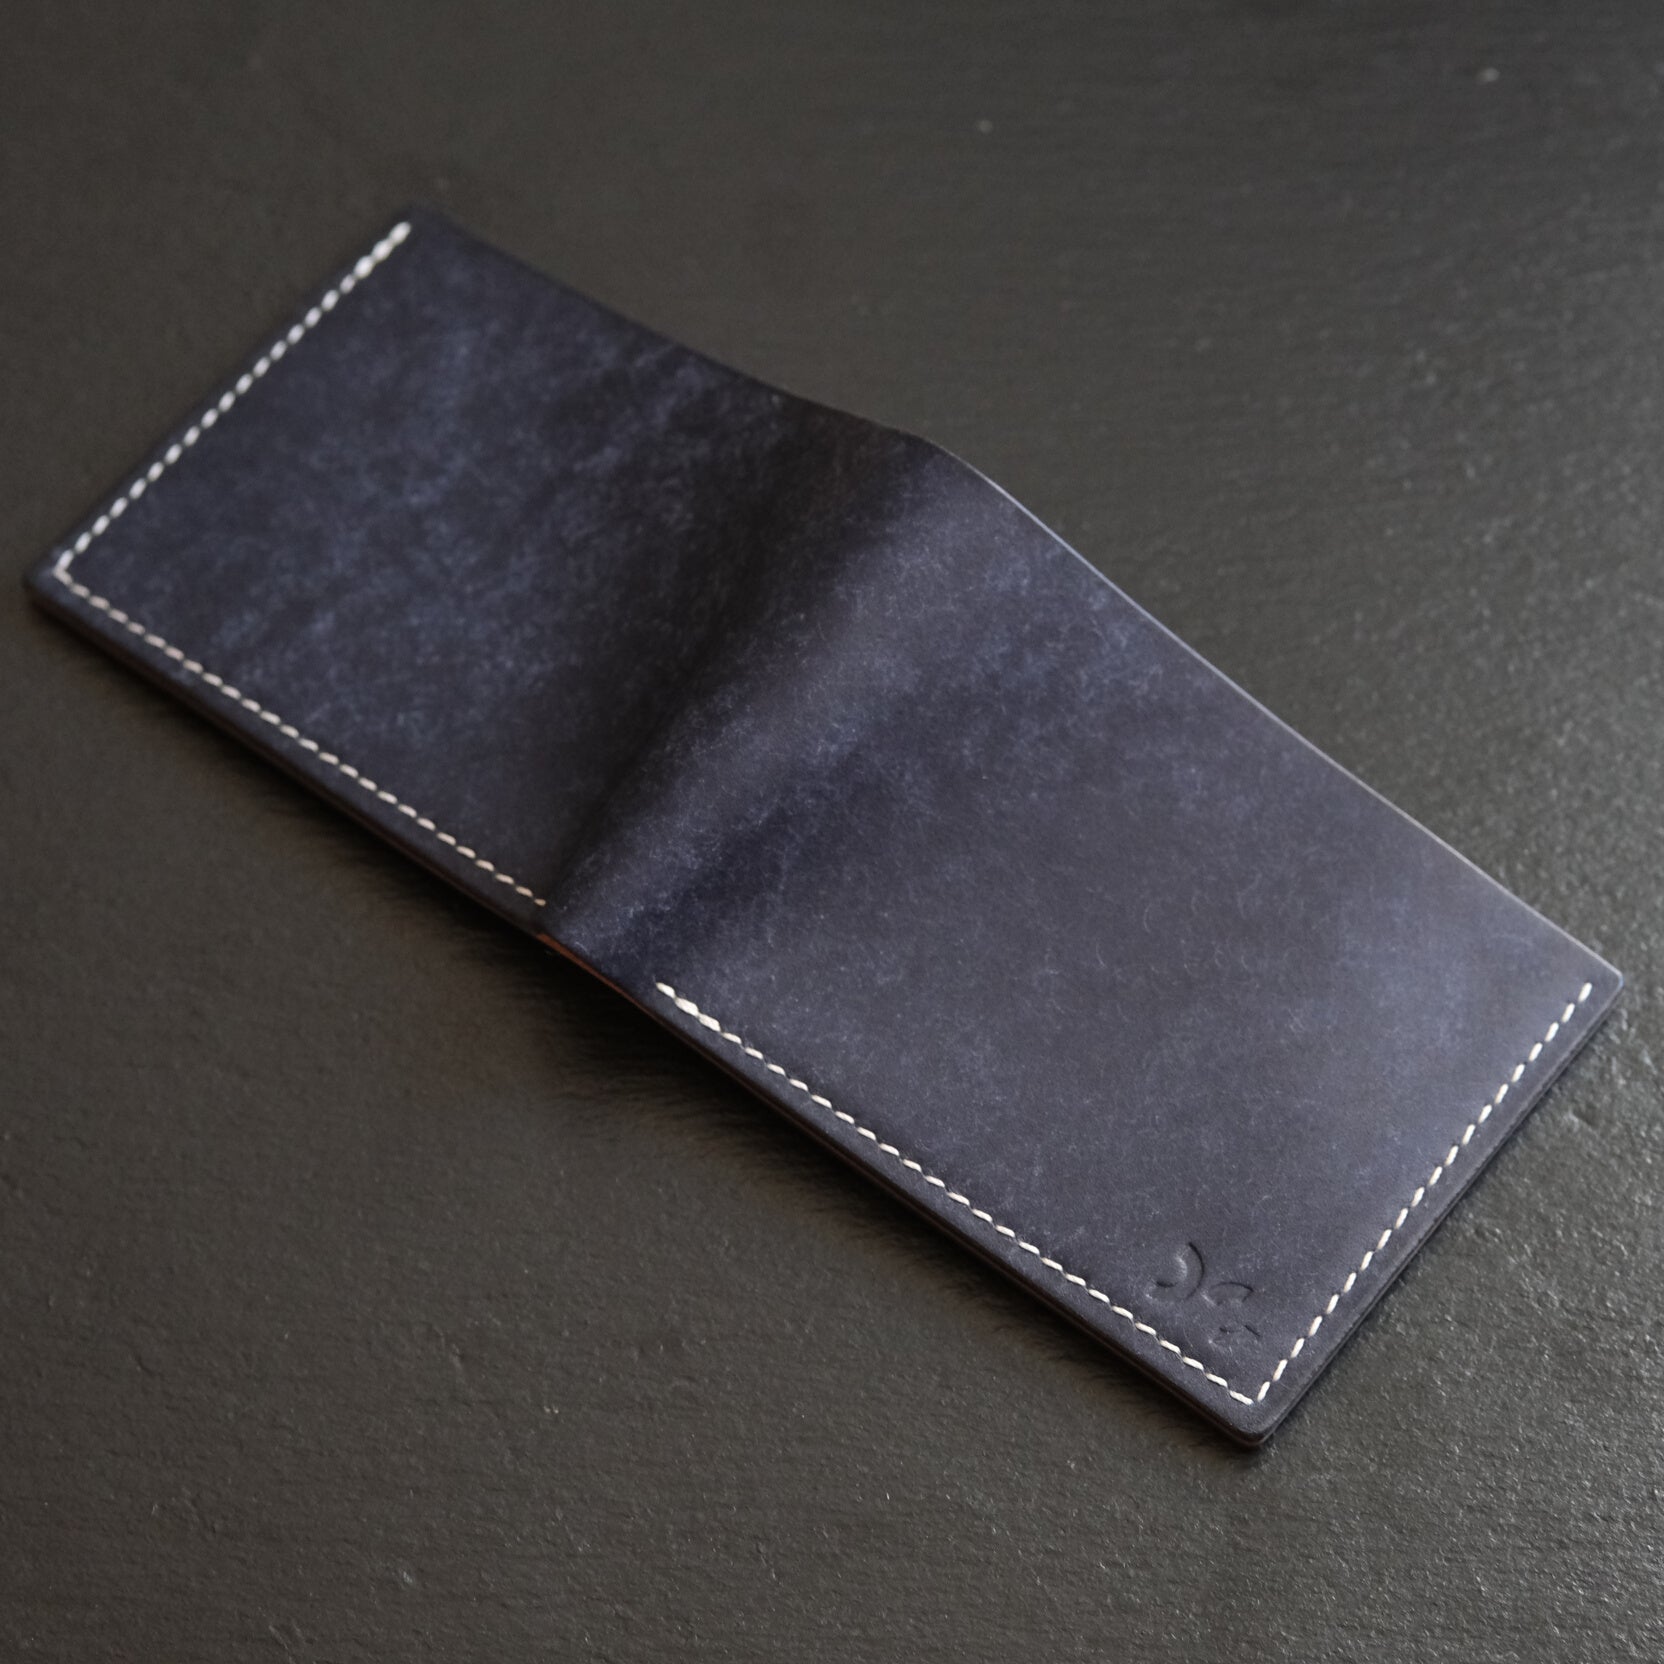 DS-027 The Hull Leather Wallet Digital Pattern